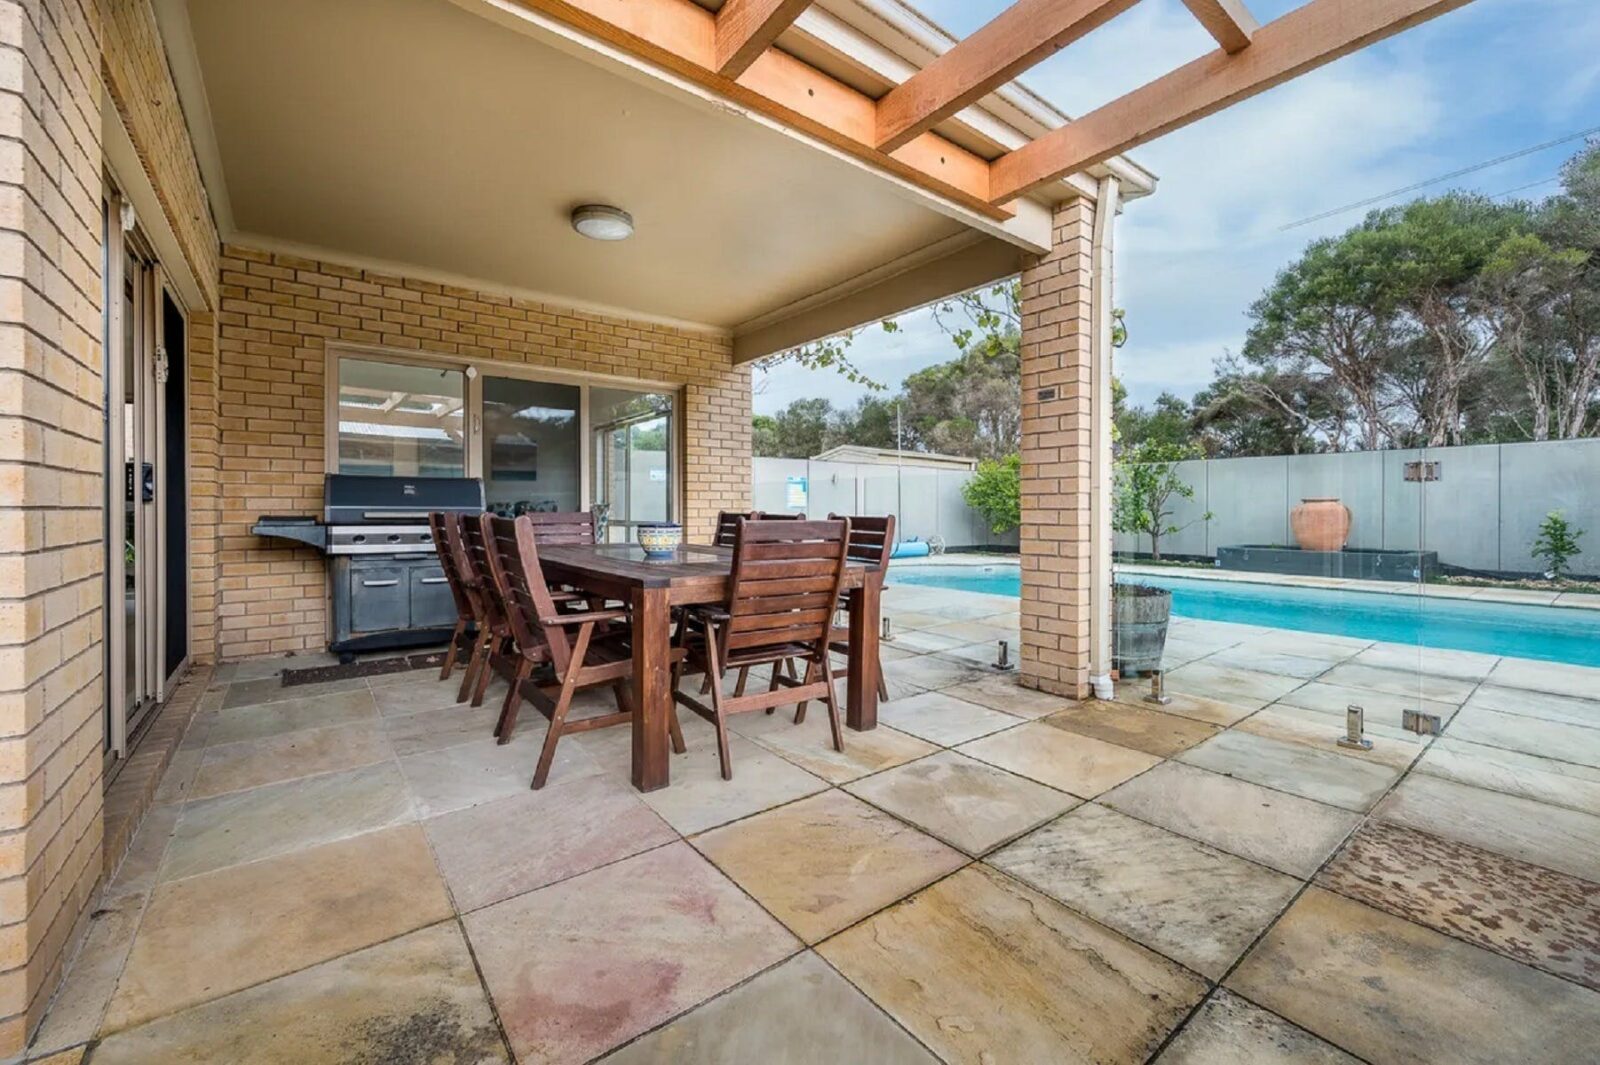 Outdoor area showing pool to right, undercover entertaining area with table for 8 & bbq